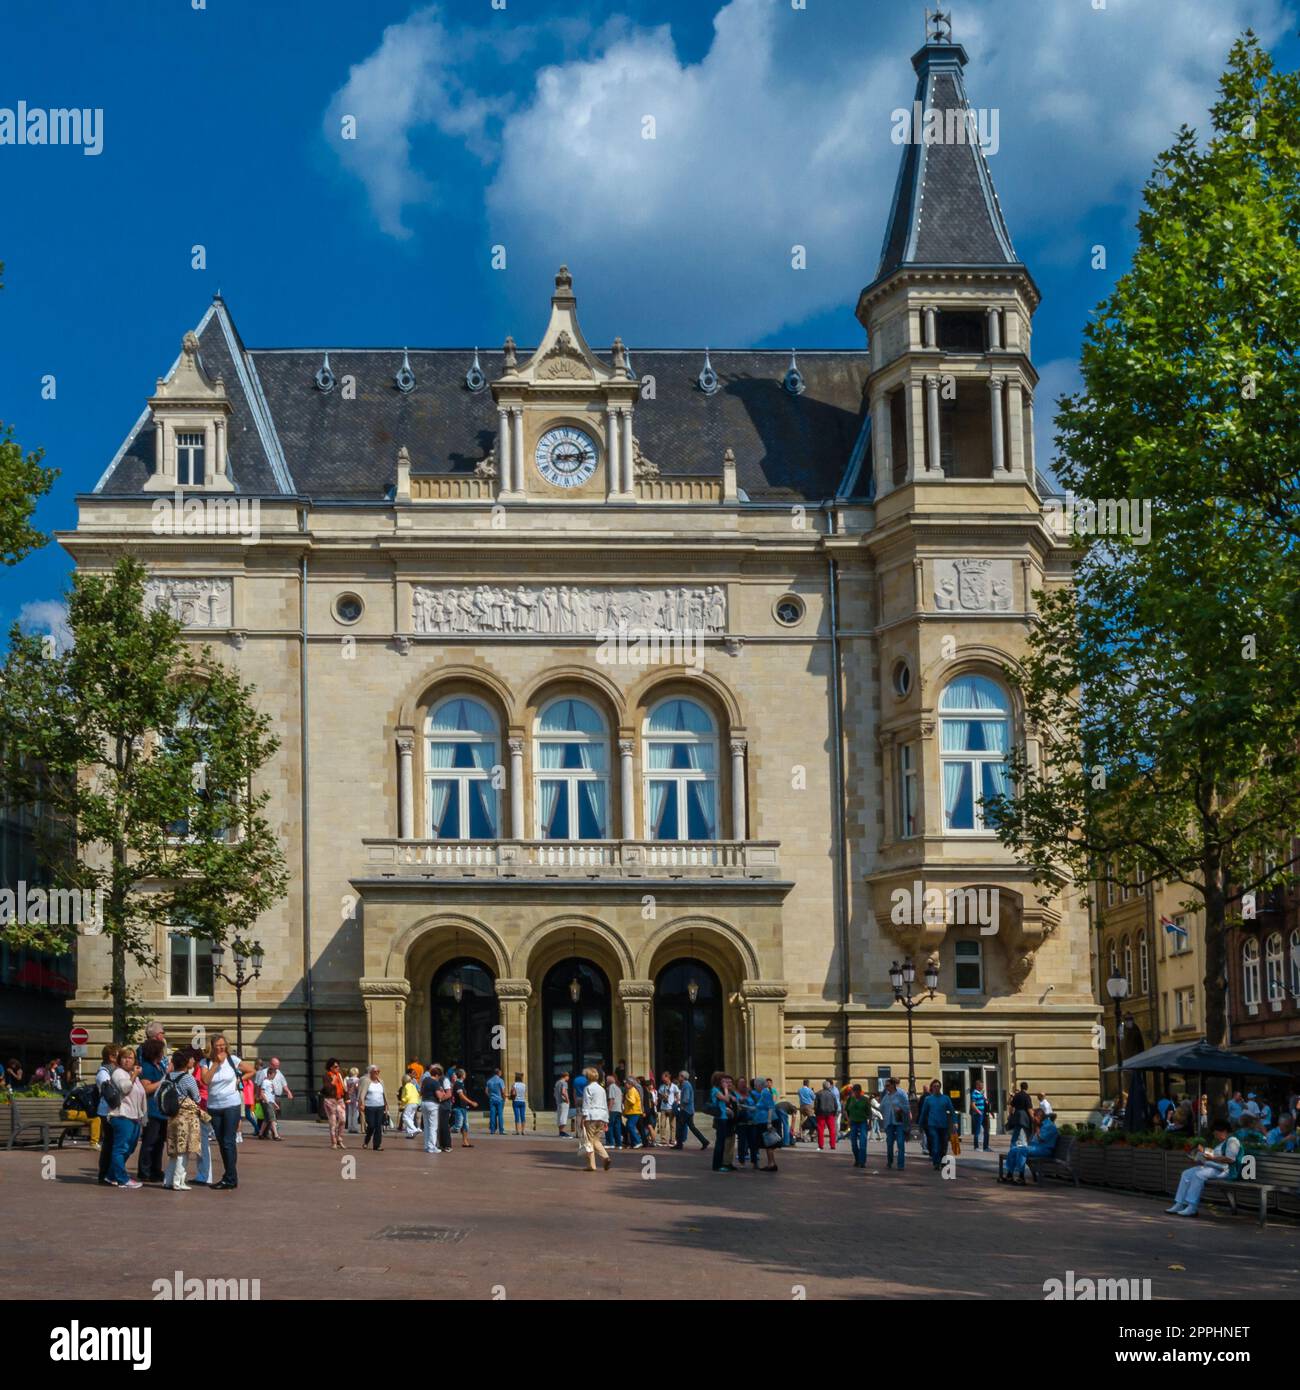 LUXEMBOURG CITY, LUXEMBOURG - AUGUST 28, 2013: Urban scene, people in a central square in the city of Luxembourg Stock Photo